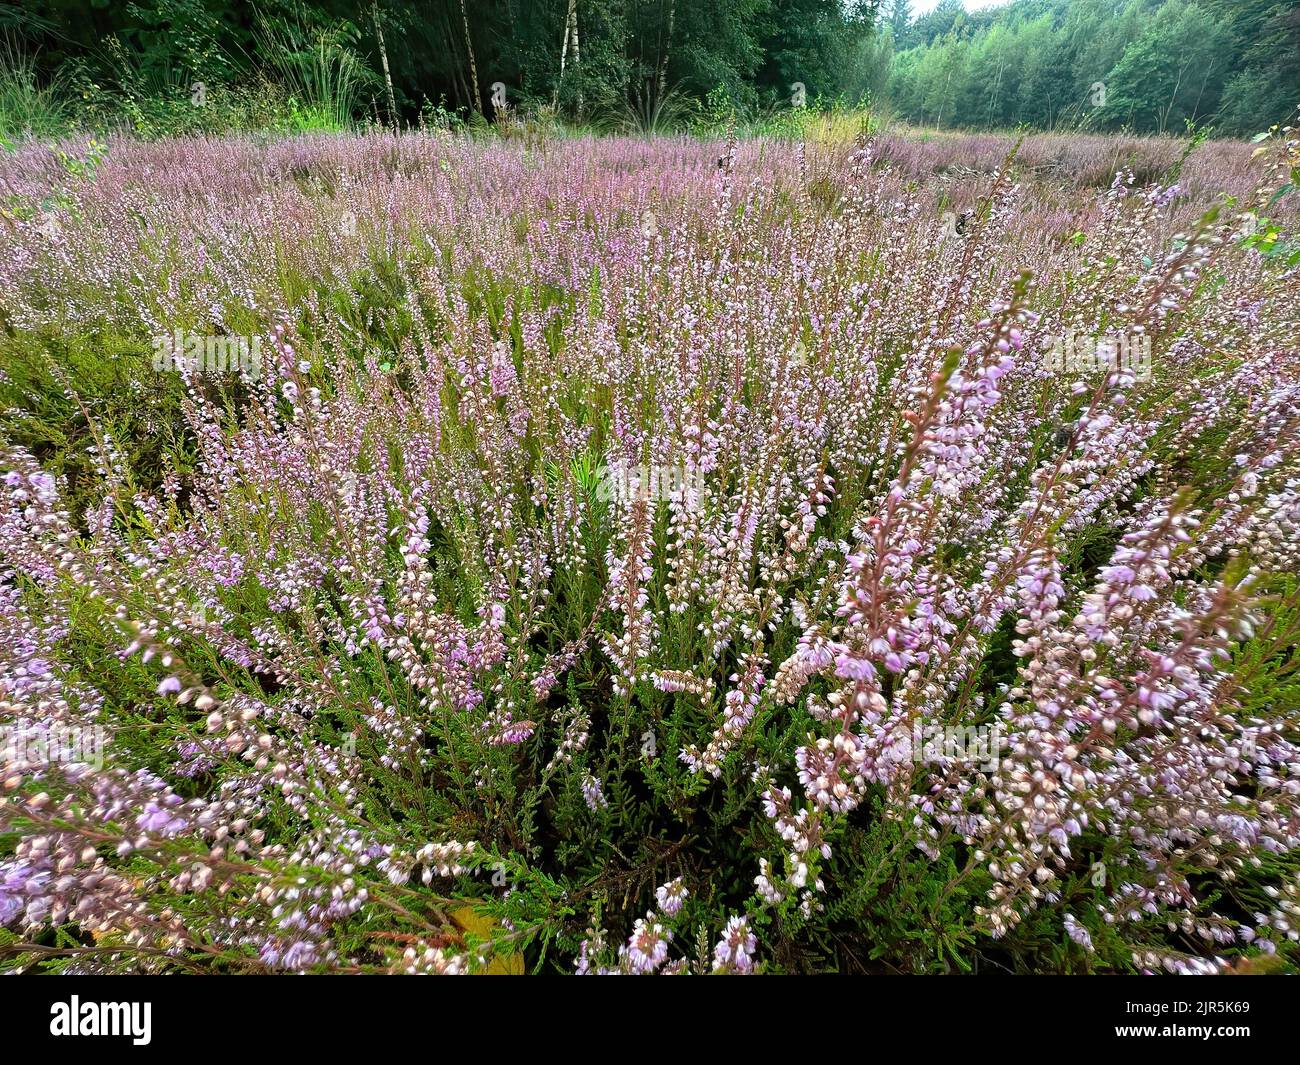 A scenic wide angle landscape on a moorland filled with purple blossoming common Heather, Calluna vulgaris Stock Photo